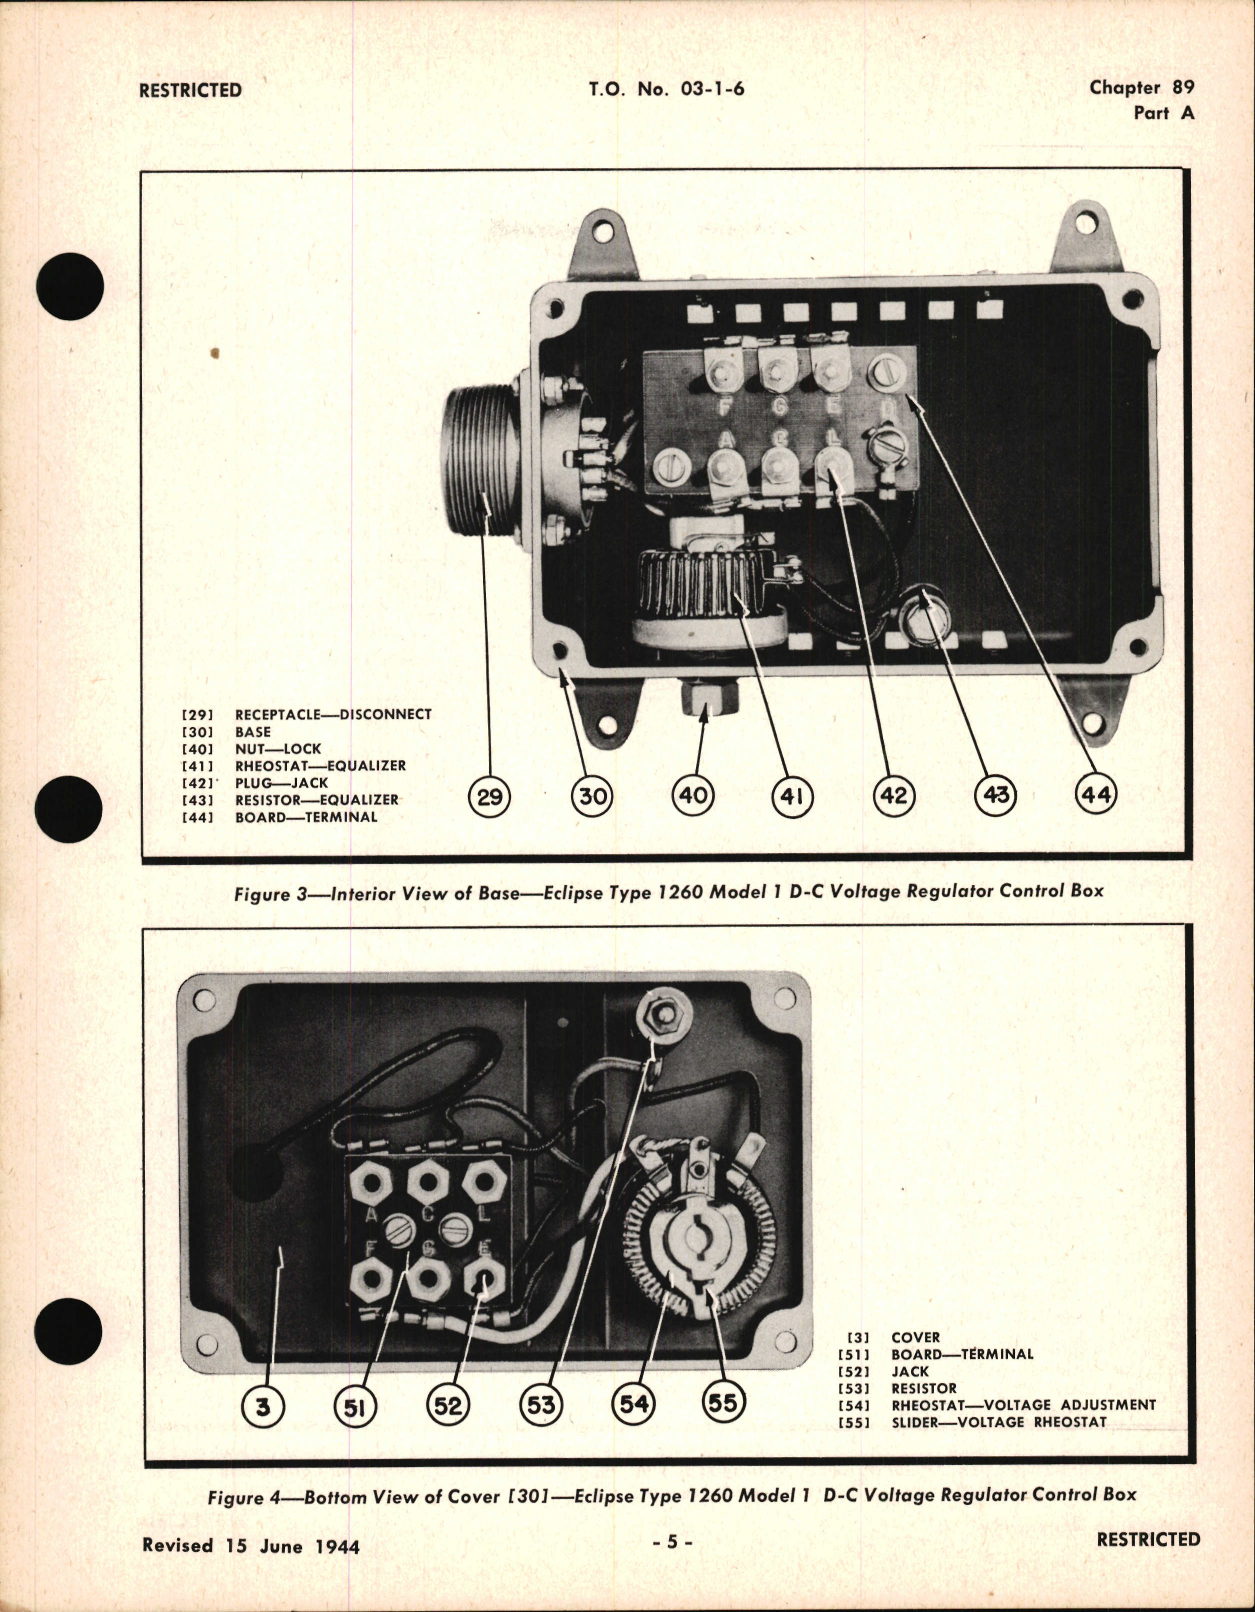 Sample page 5 from AirCorps Library document: Operating and Service Instructions for D-C Pile Voltage Regulator Control Box, Type 1260 Model 1, Ch 89 Part A